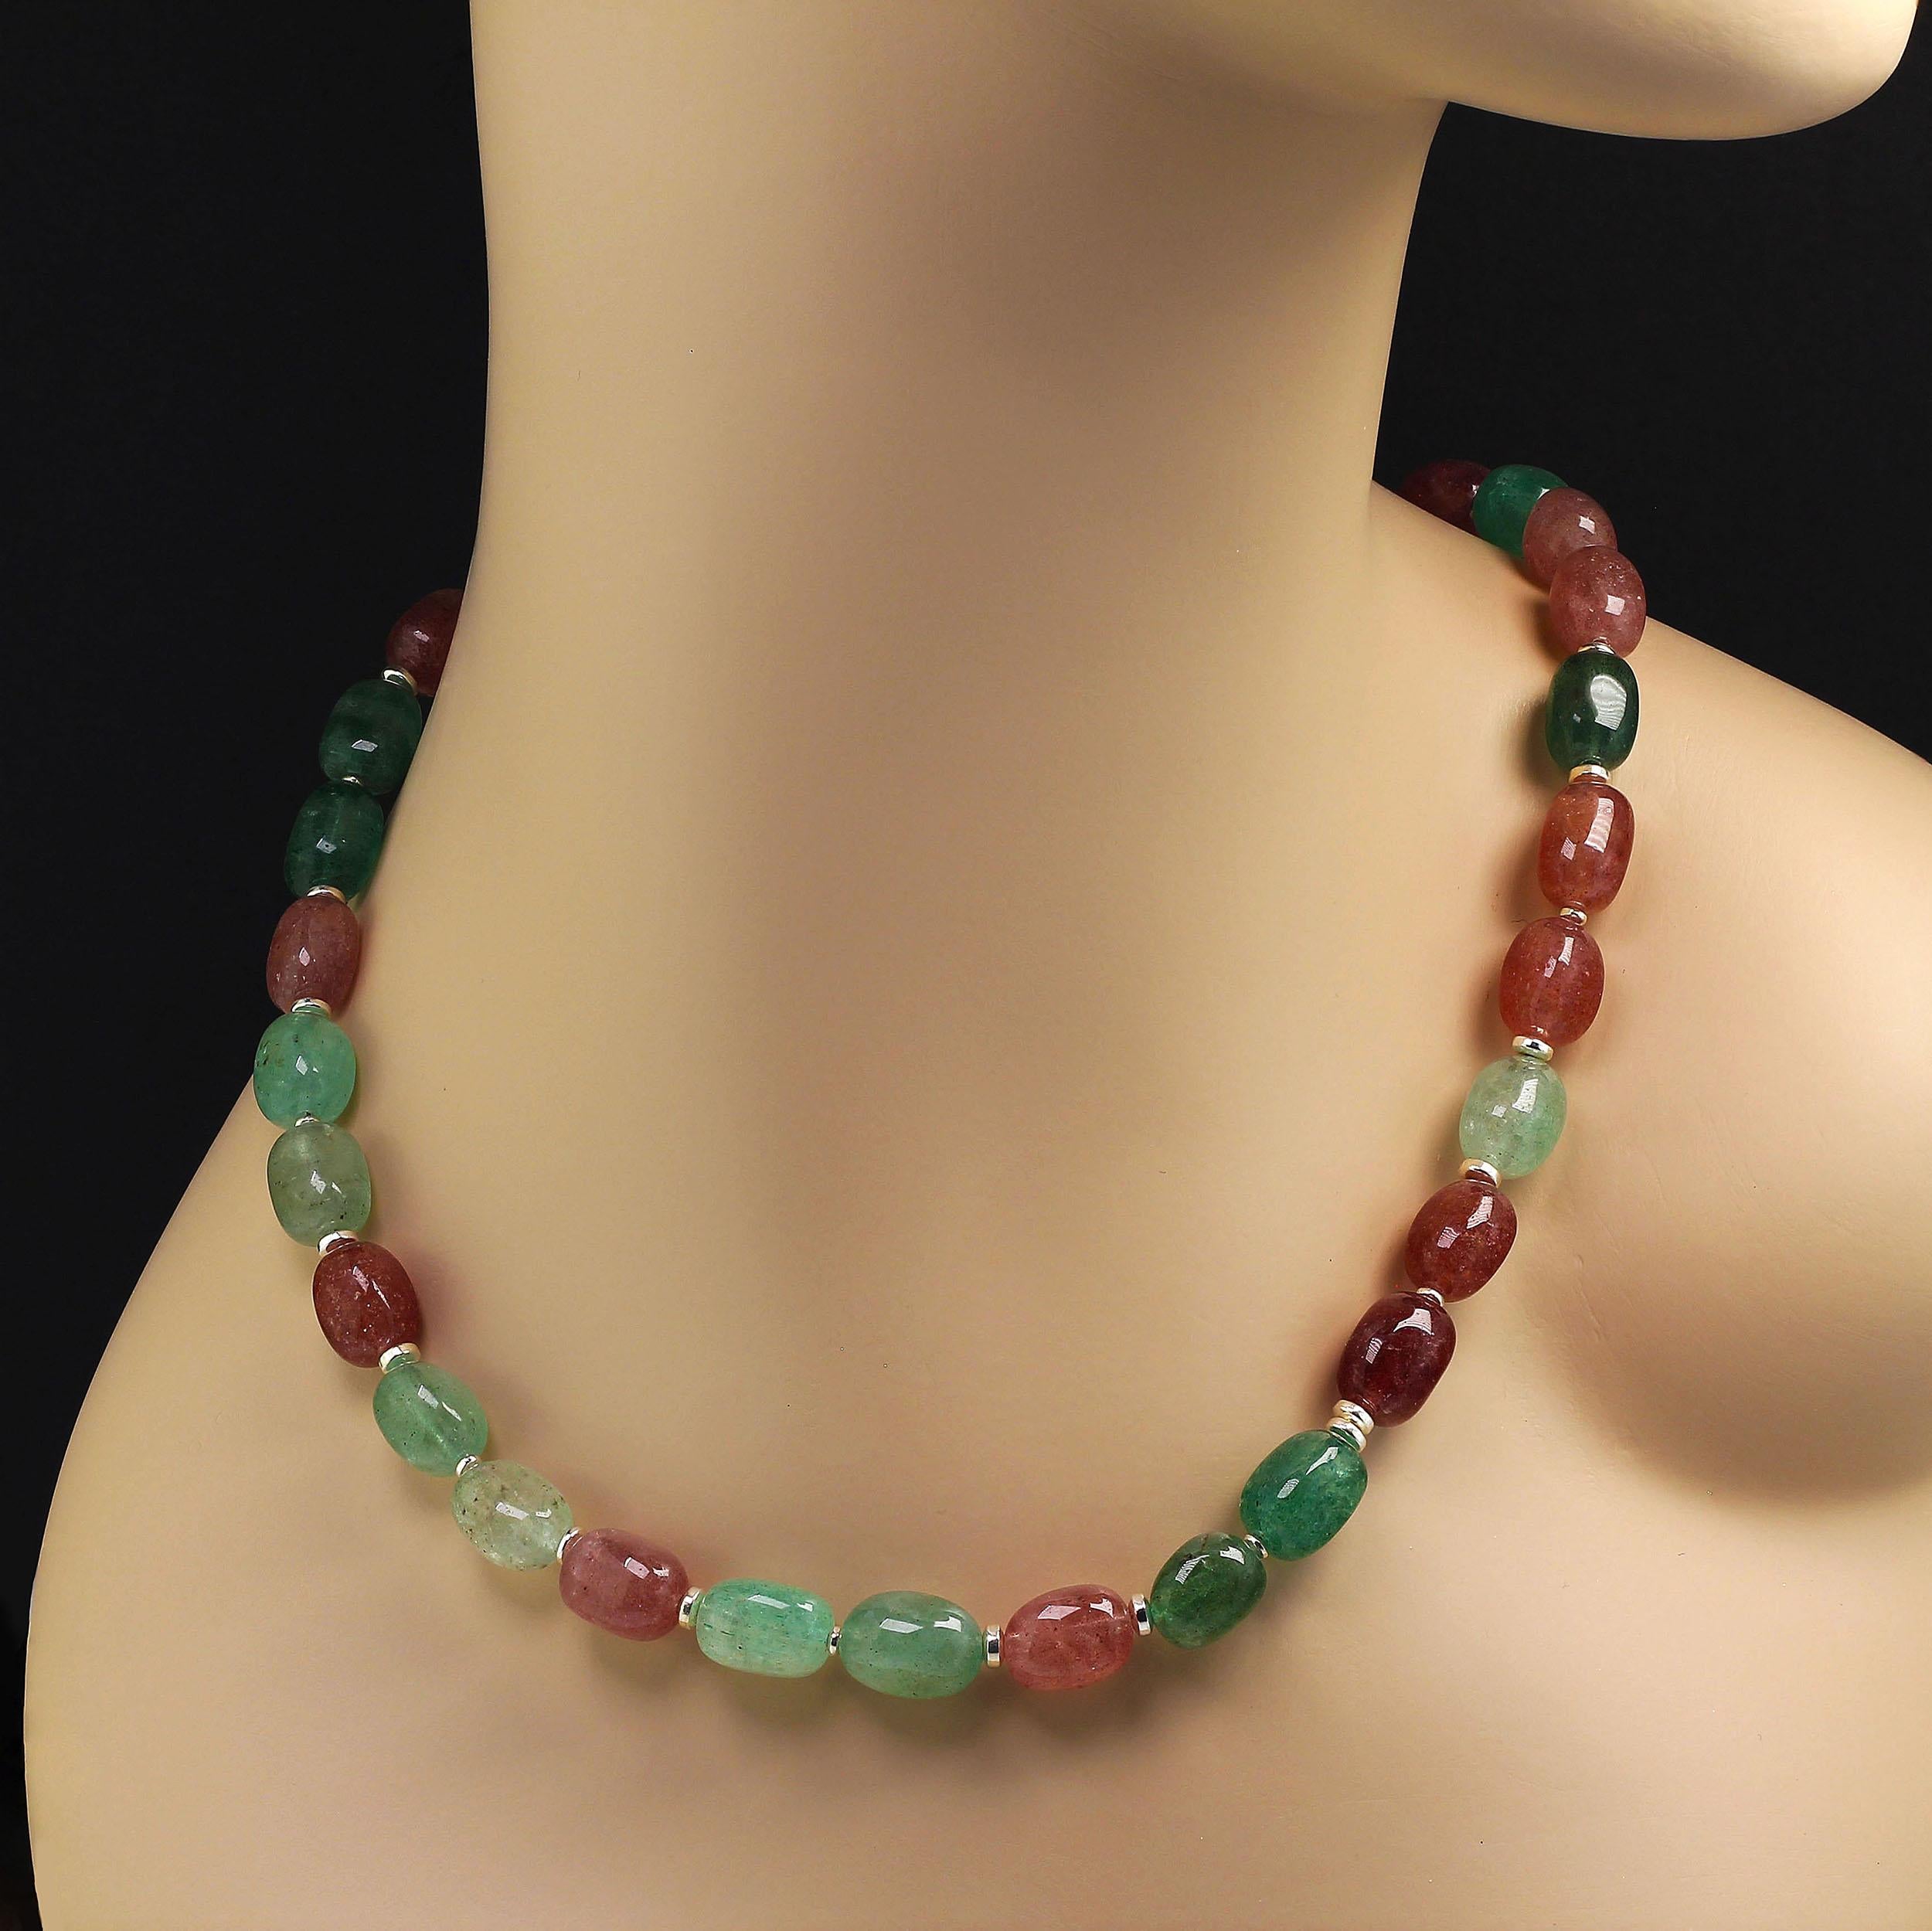 19 Inch necklace of highly polished barrel shaped quartz in lovely shades of rose and green. Arriving just in time for the holiday season this charming necklace will delight and amuse you. Shiny silvery spacers separate the red and green quartz. A